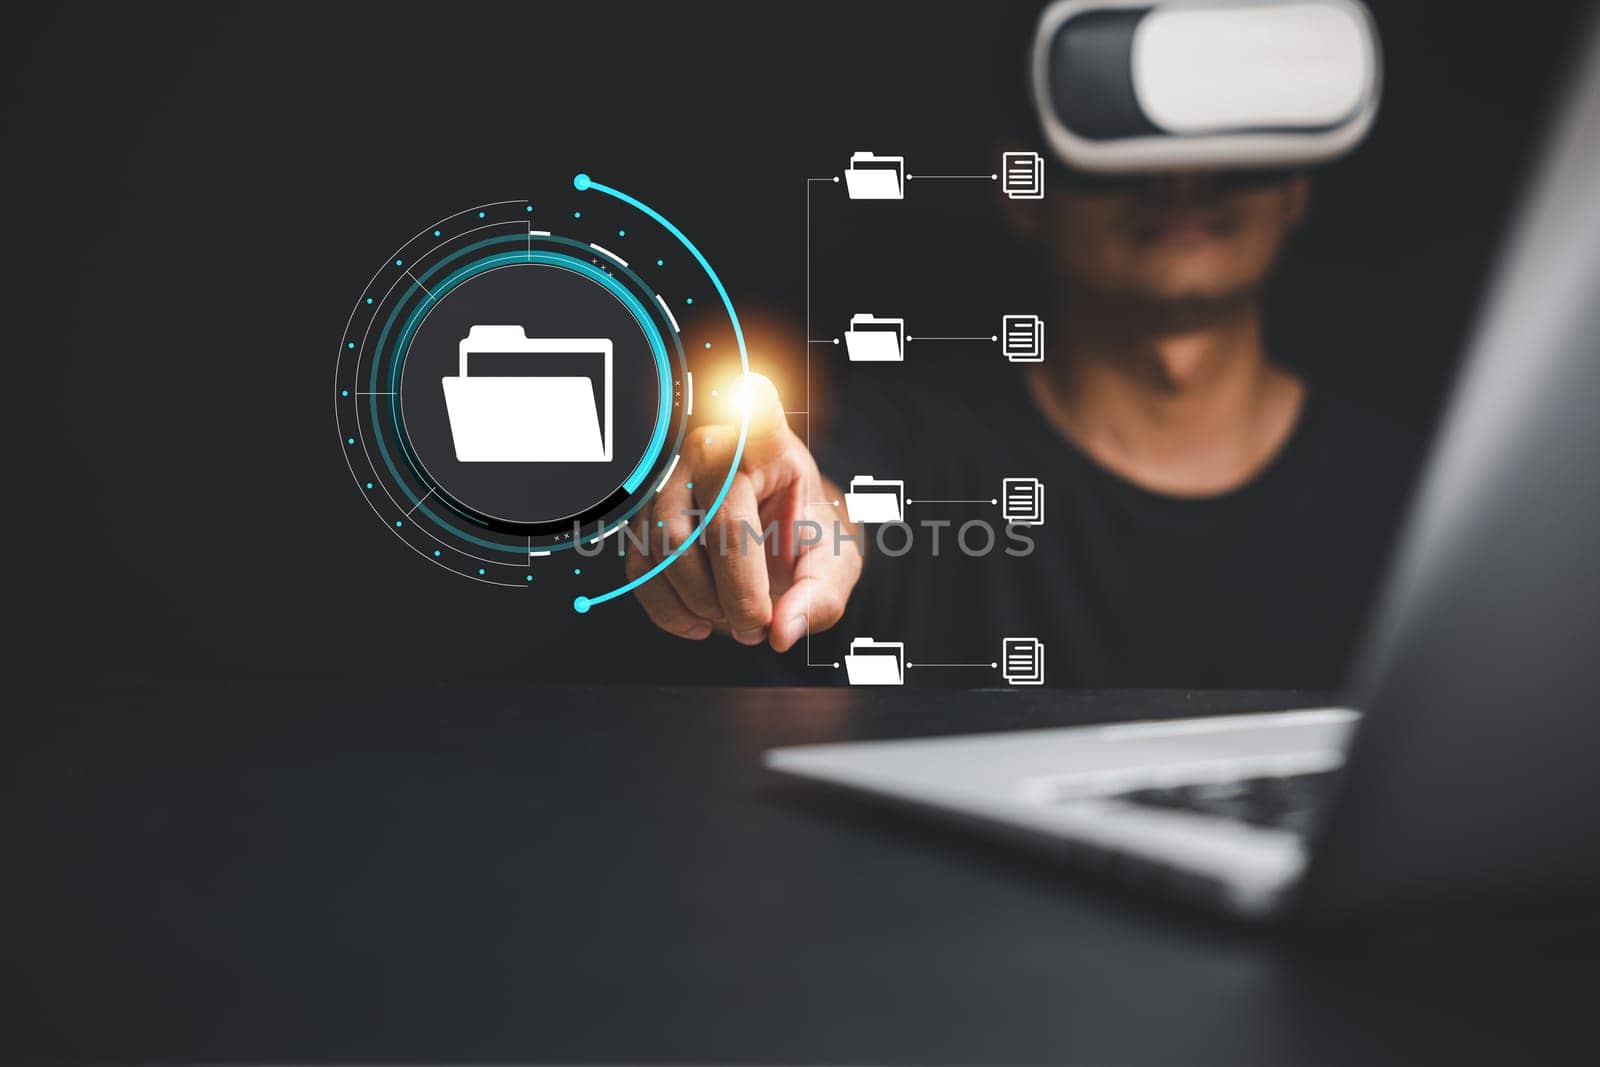 Virtual reality VR concept with a man working on a Document Management System DMS. Illustrating the convergence of Internet Technology and efficient data file management.